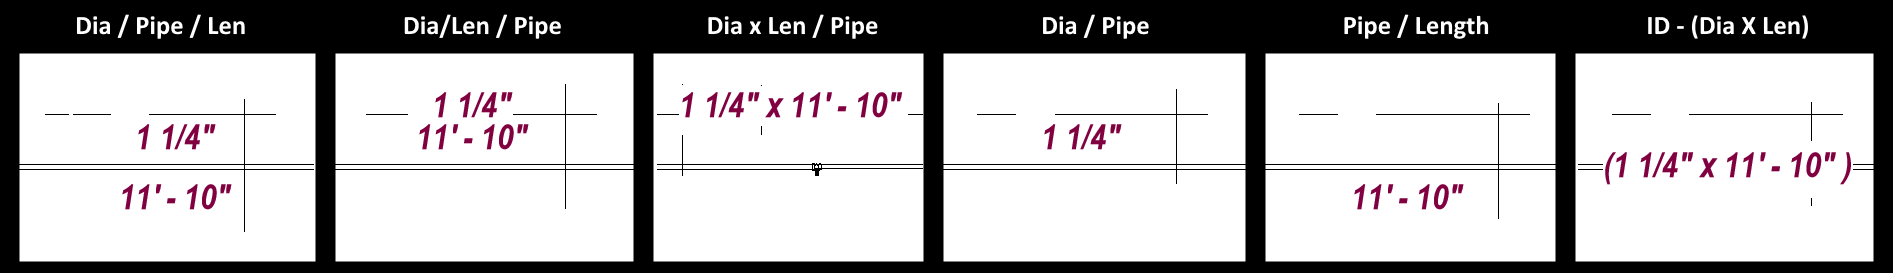 HCAD1 Pipe Size Tags CL